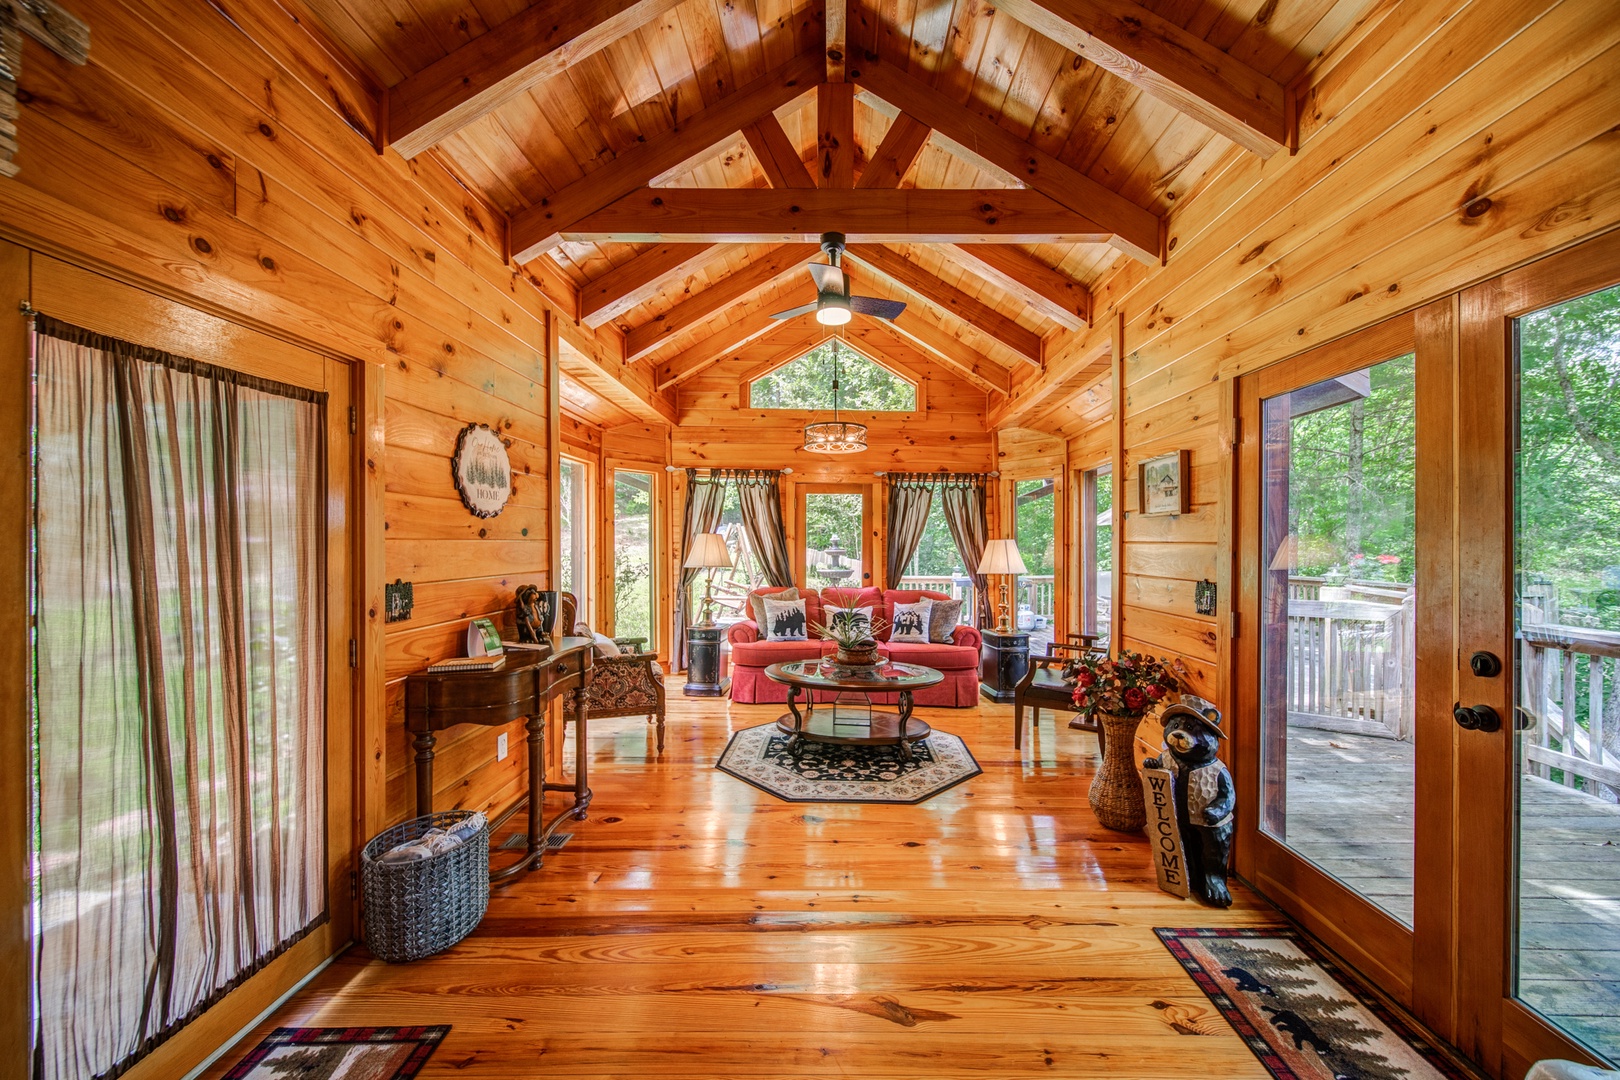 Soaring vaulted ceilings & elegant cabin décor will delight in the sitting room